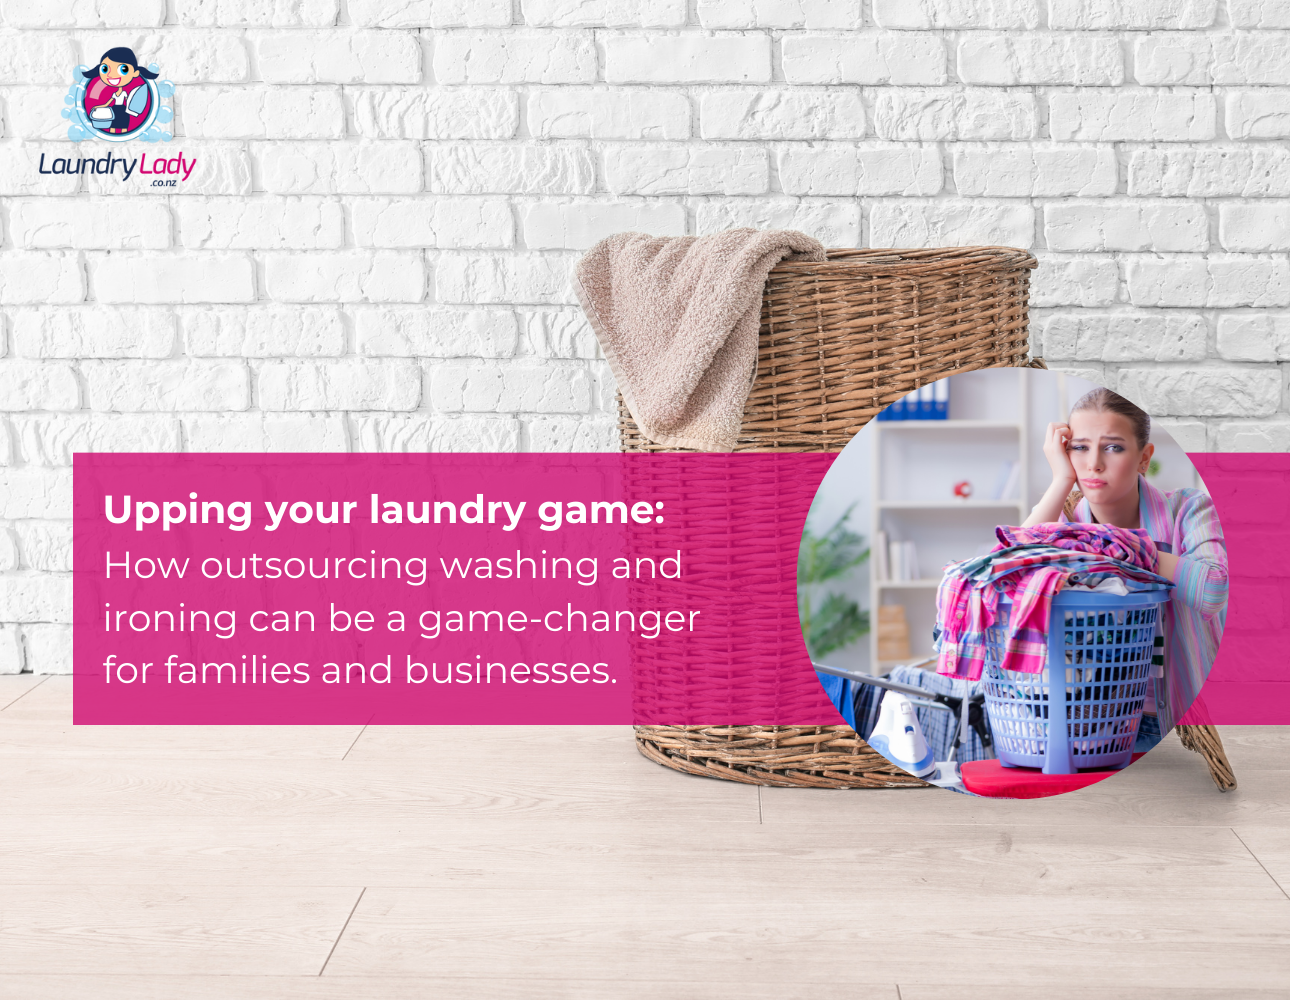 How to up your laundry game and save time at home